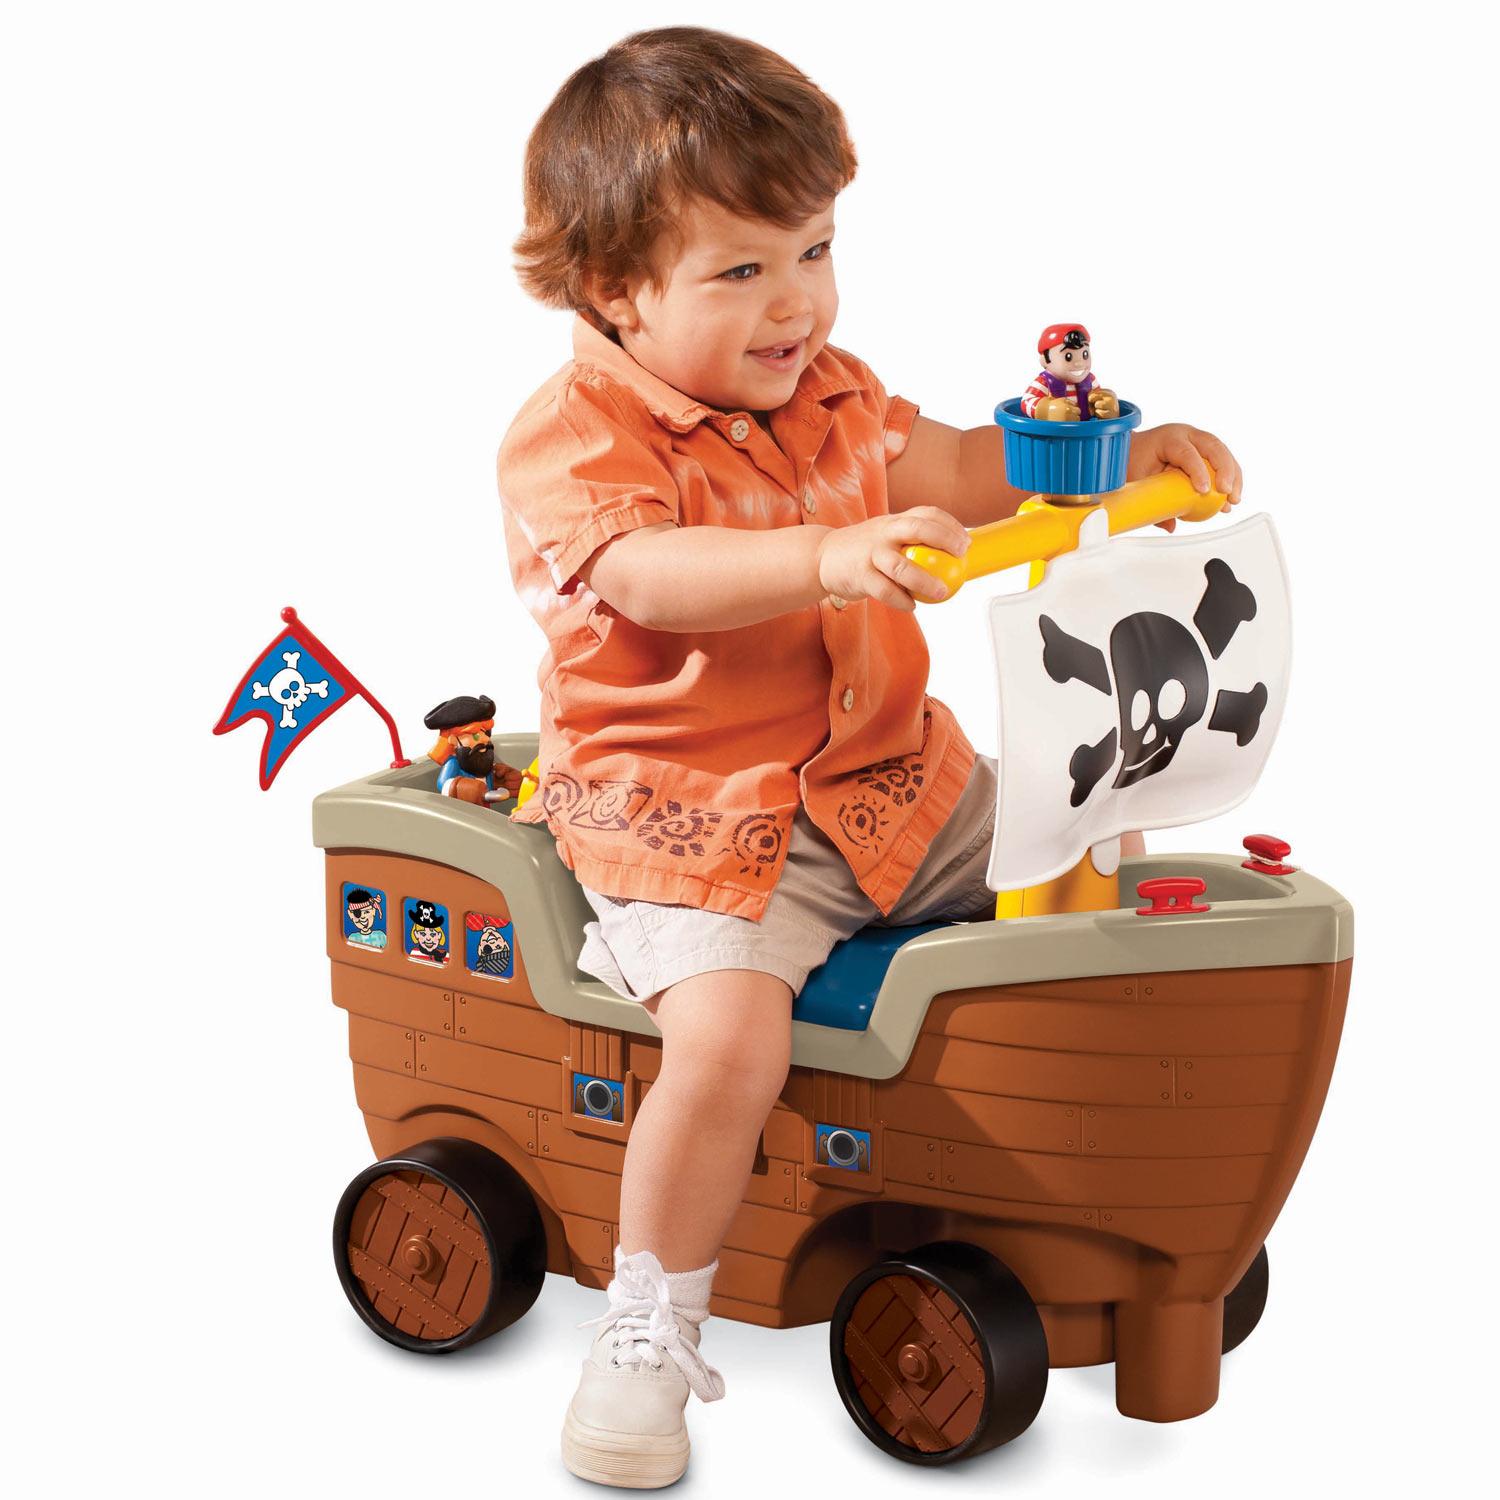 Pirate Ship kids toy - Play 'n Scoot Pirate Ship